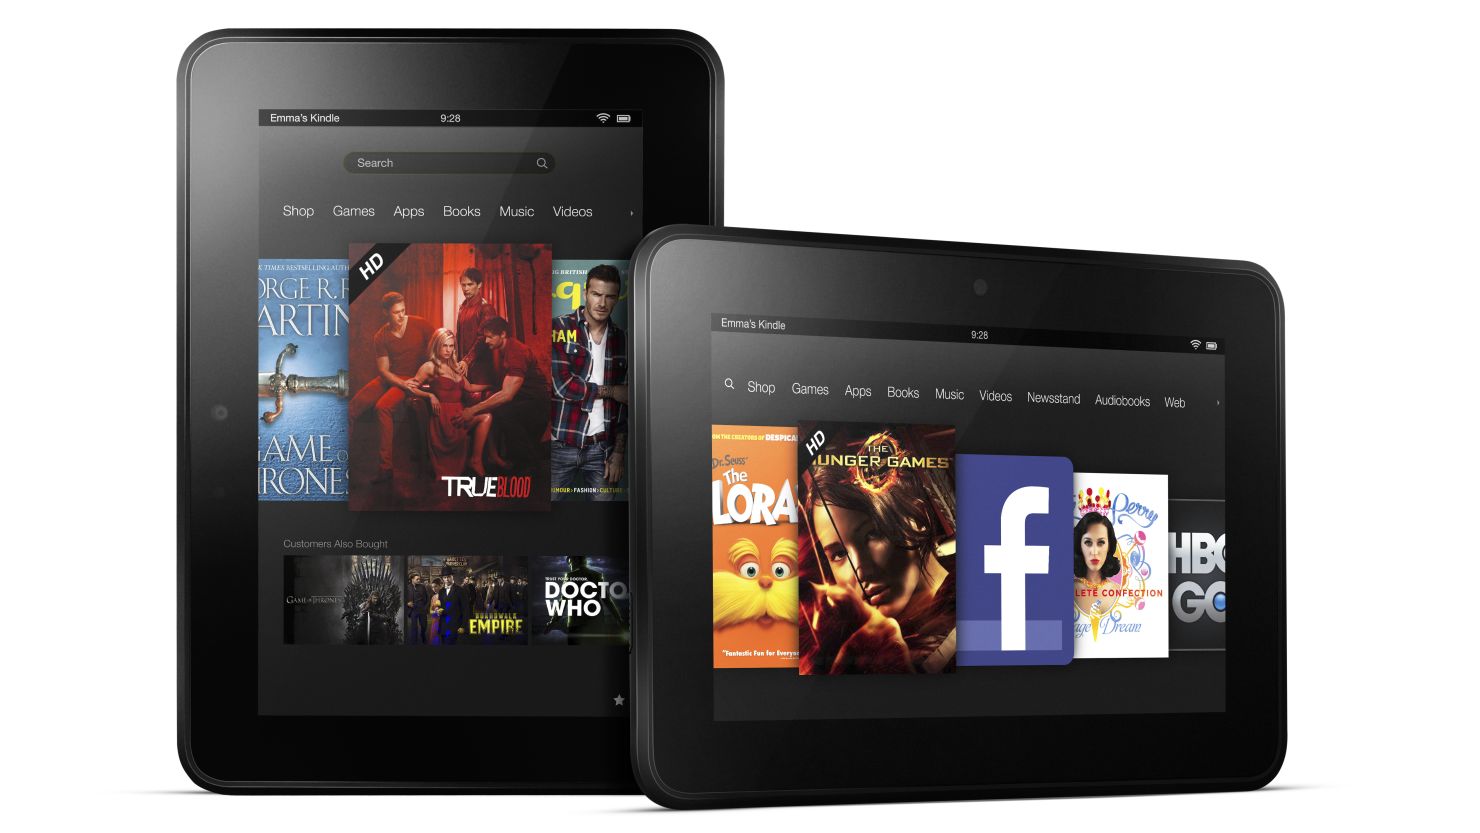 Amazon's new 7-inch Kindle Fire HD will cost $199 and ship September 14.